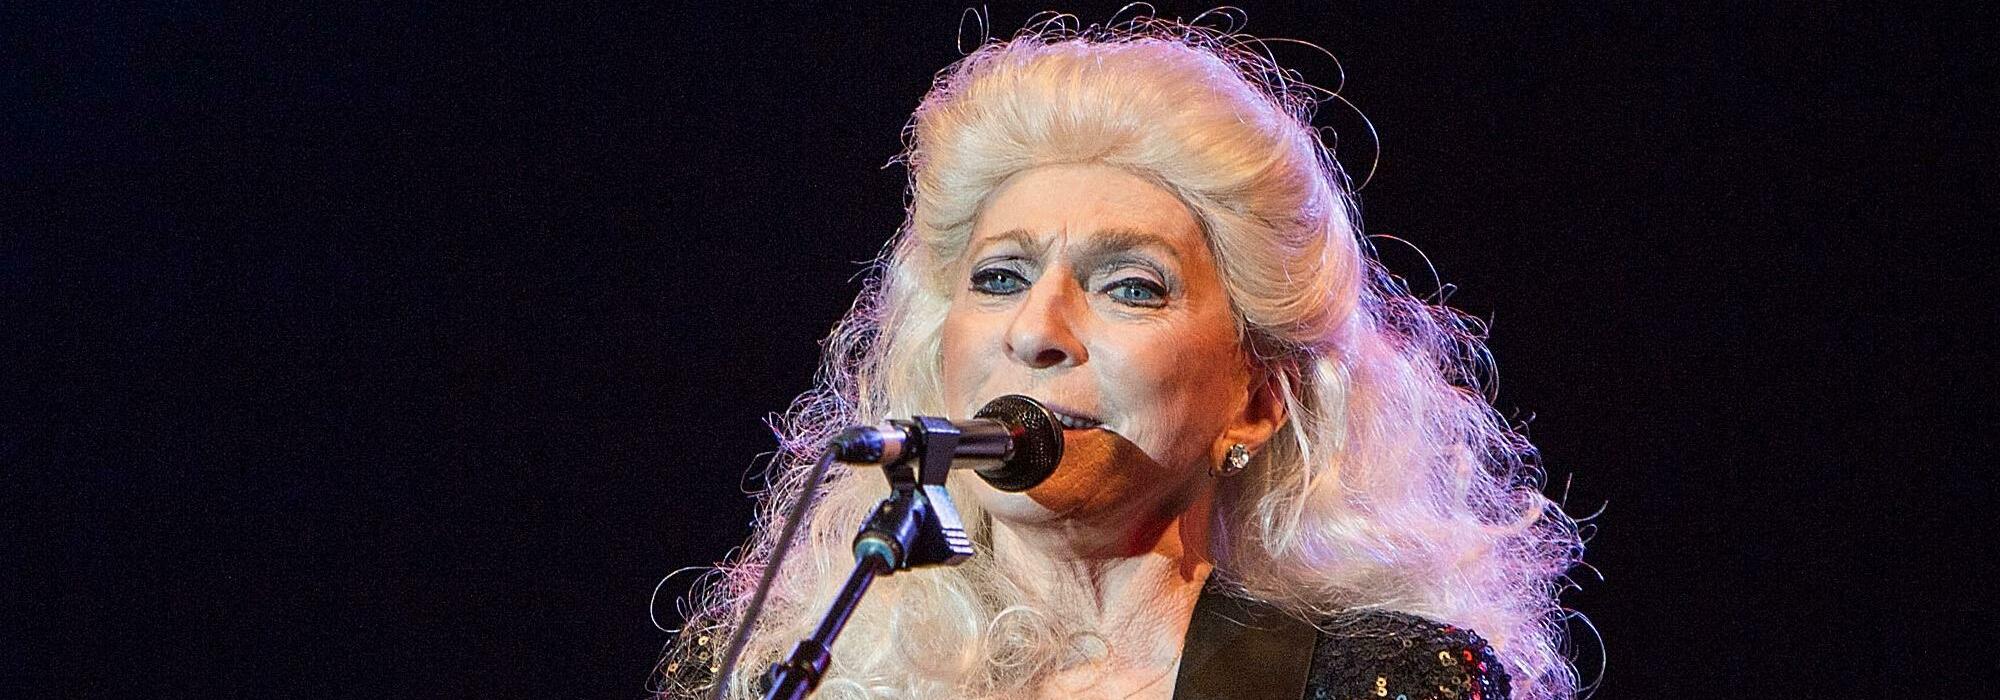 A Judy Collins live event